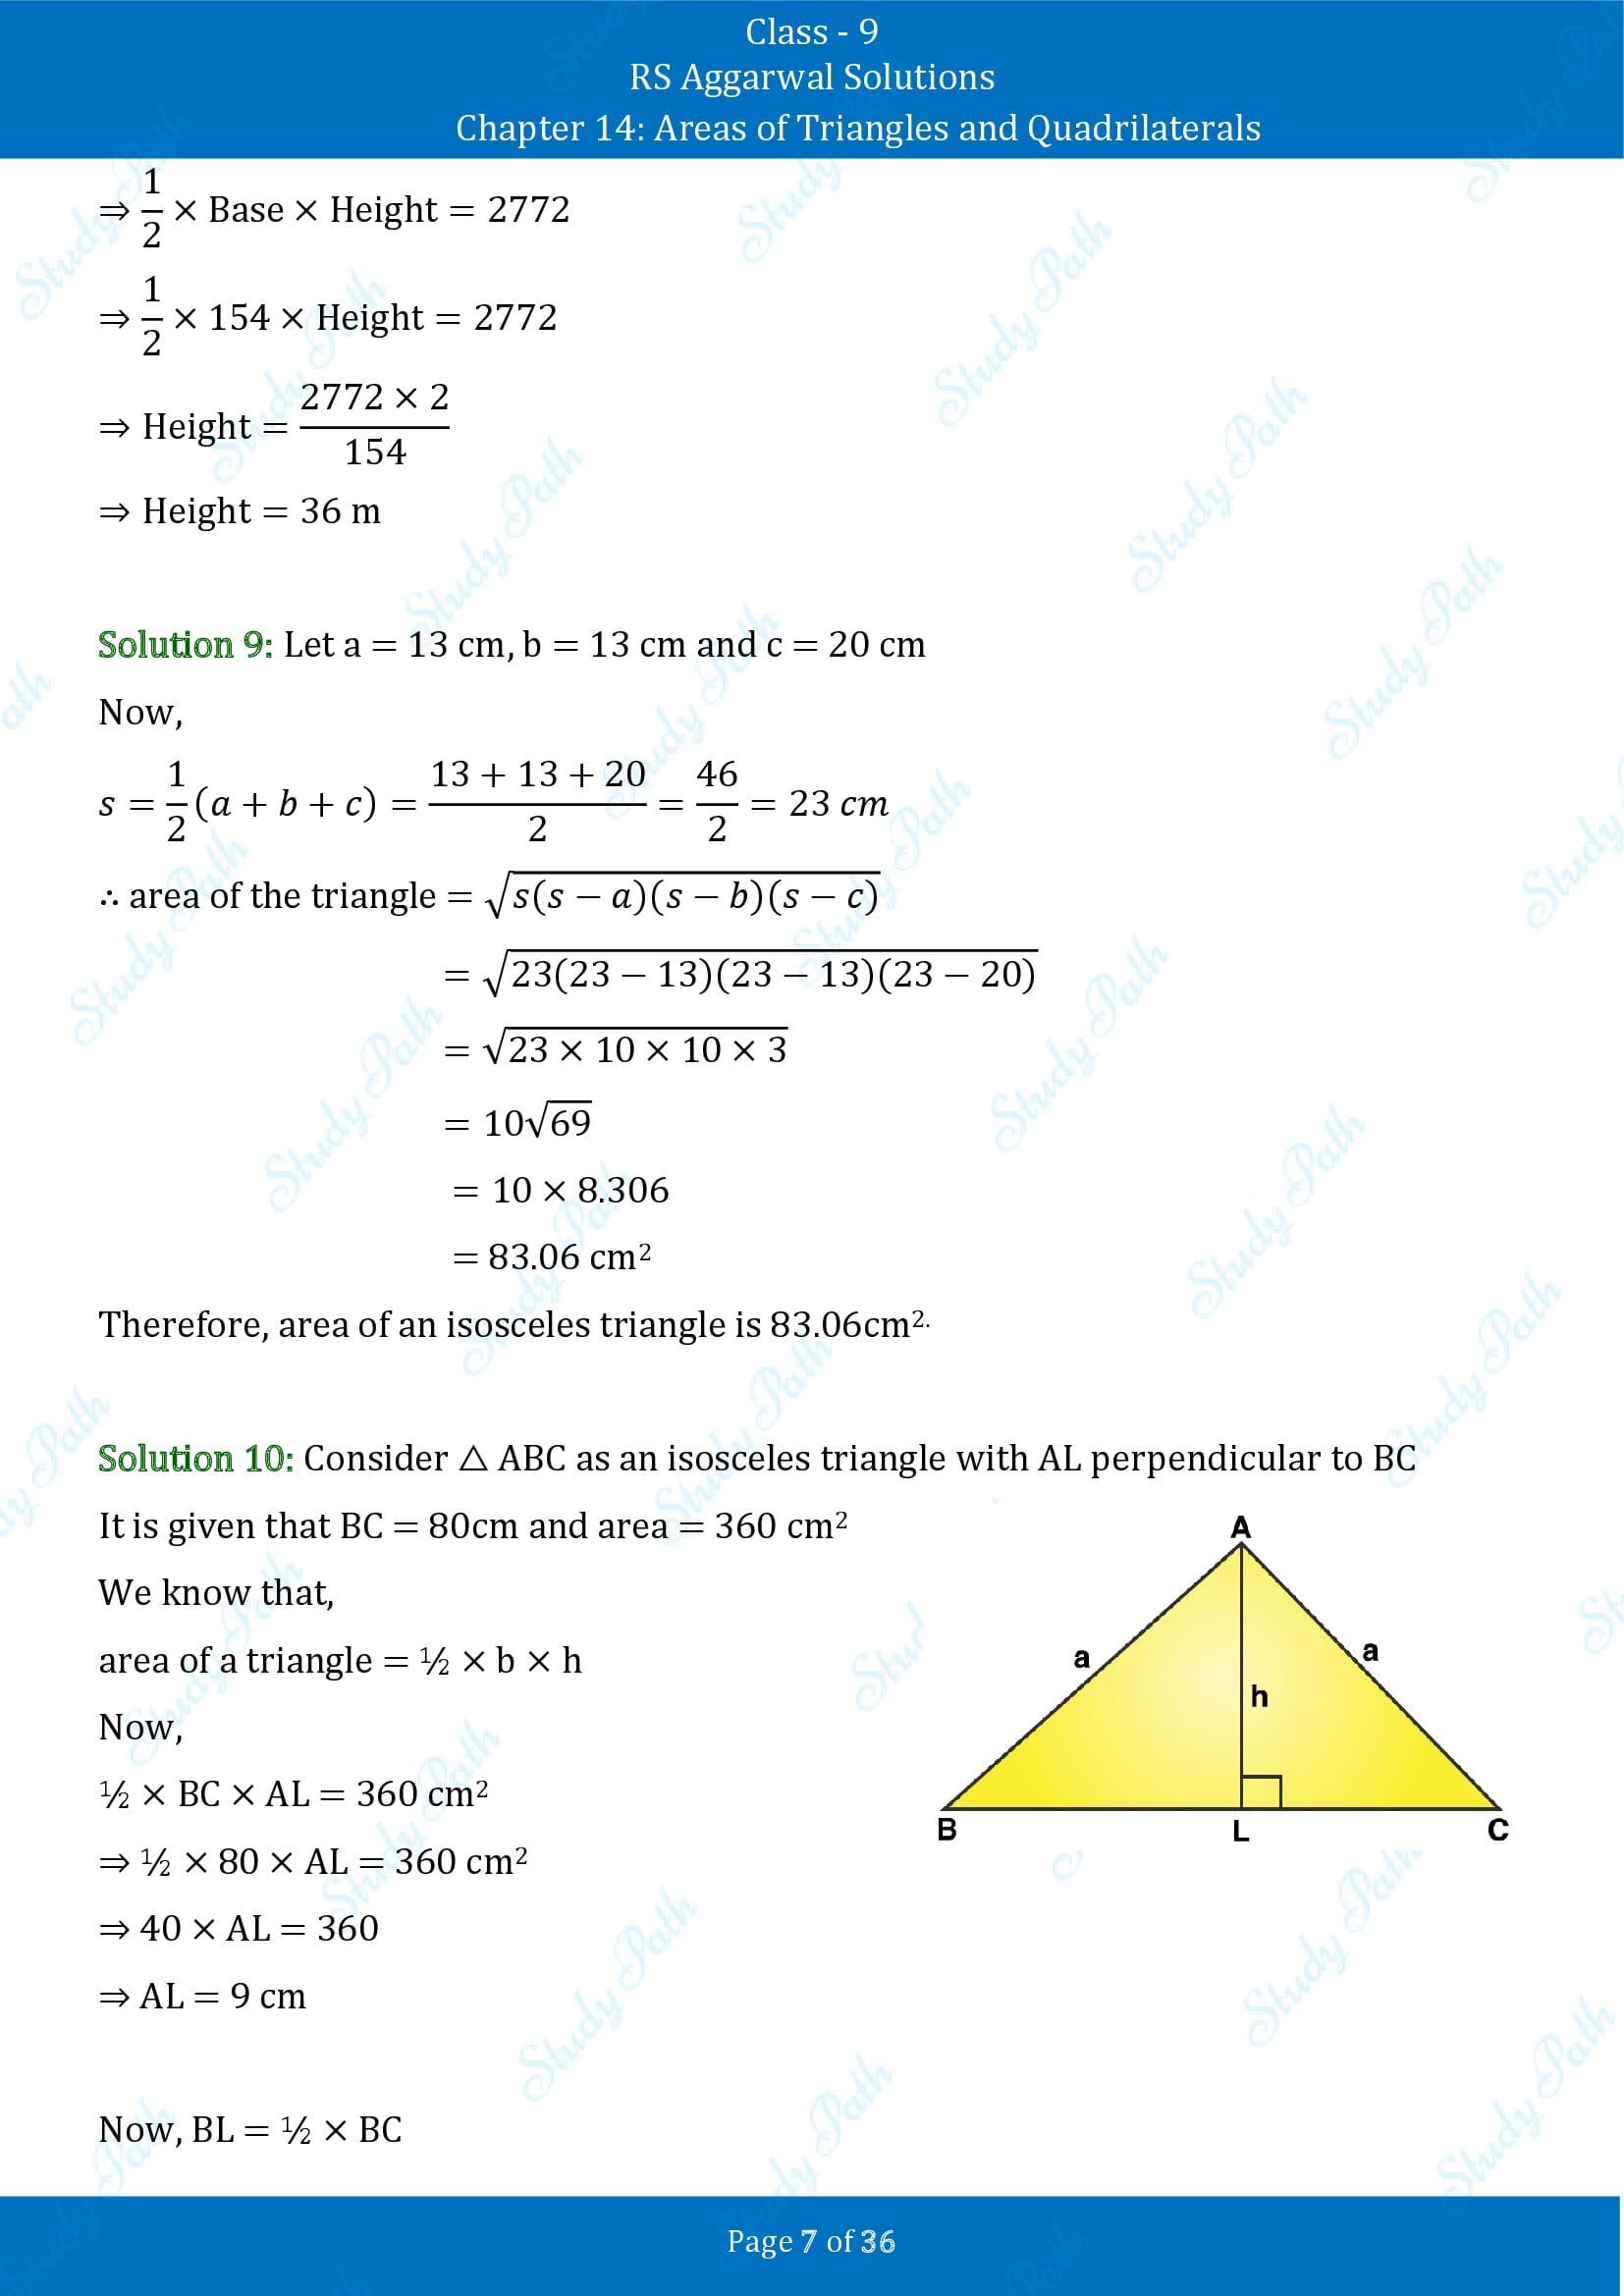 RS Aggarwal Solutions Class 9 Chapter 14 Areas of Triangles and Quadrilaterals Exercise 14 00007